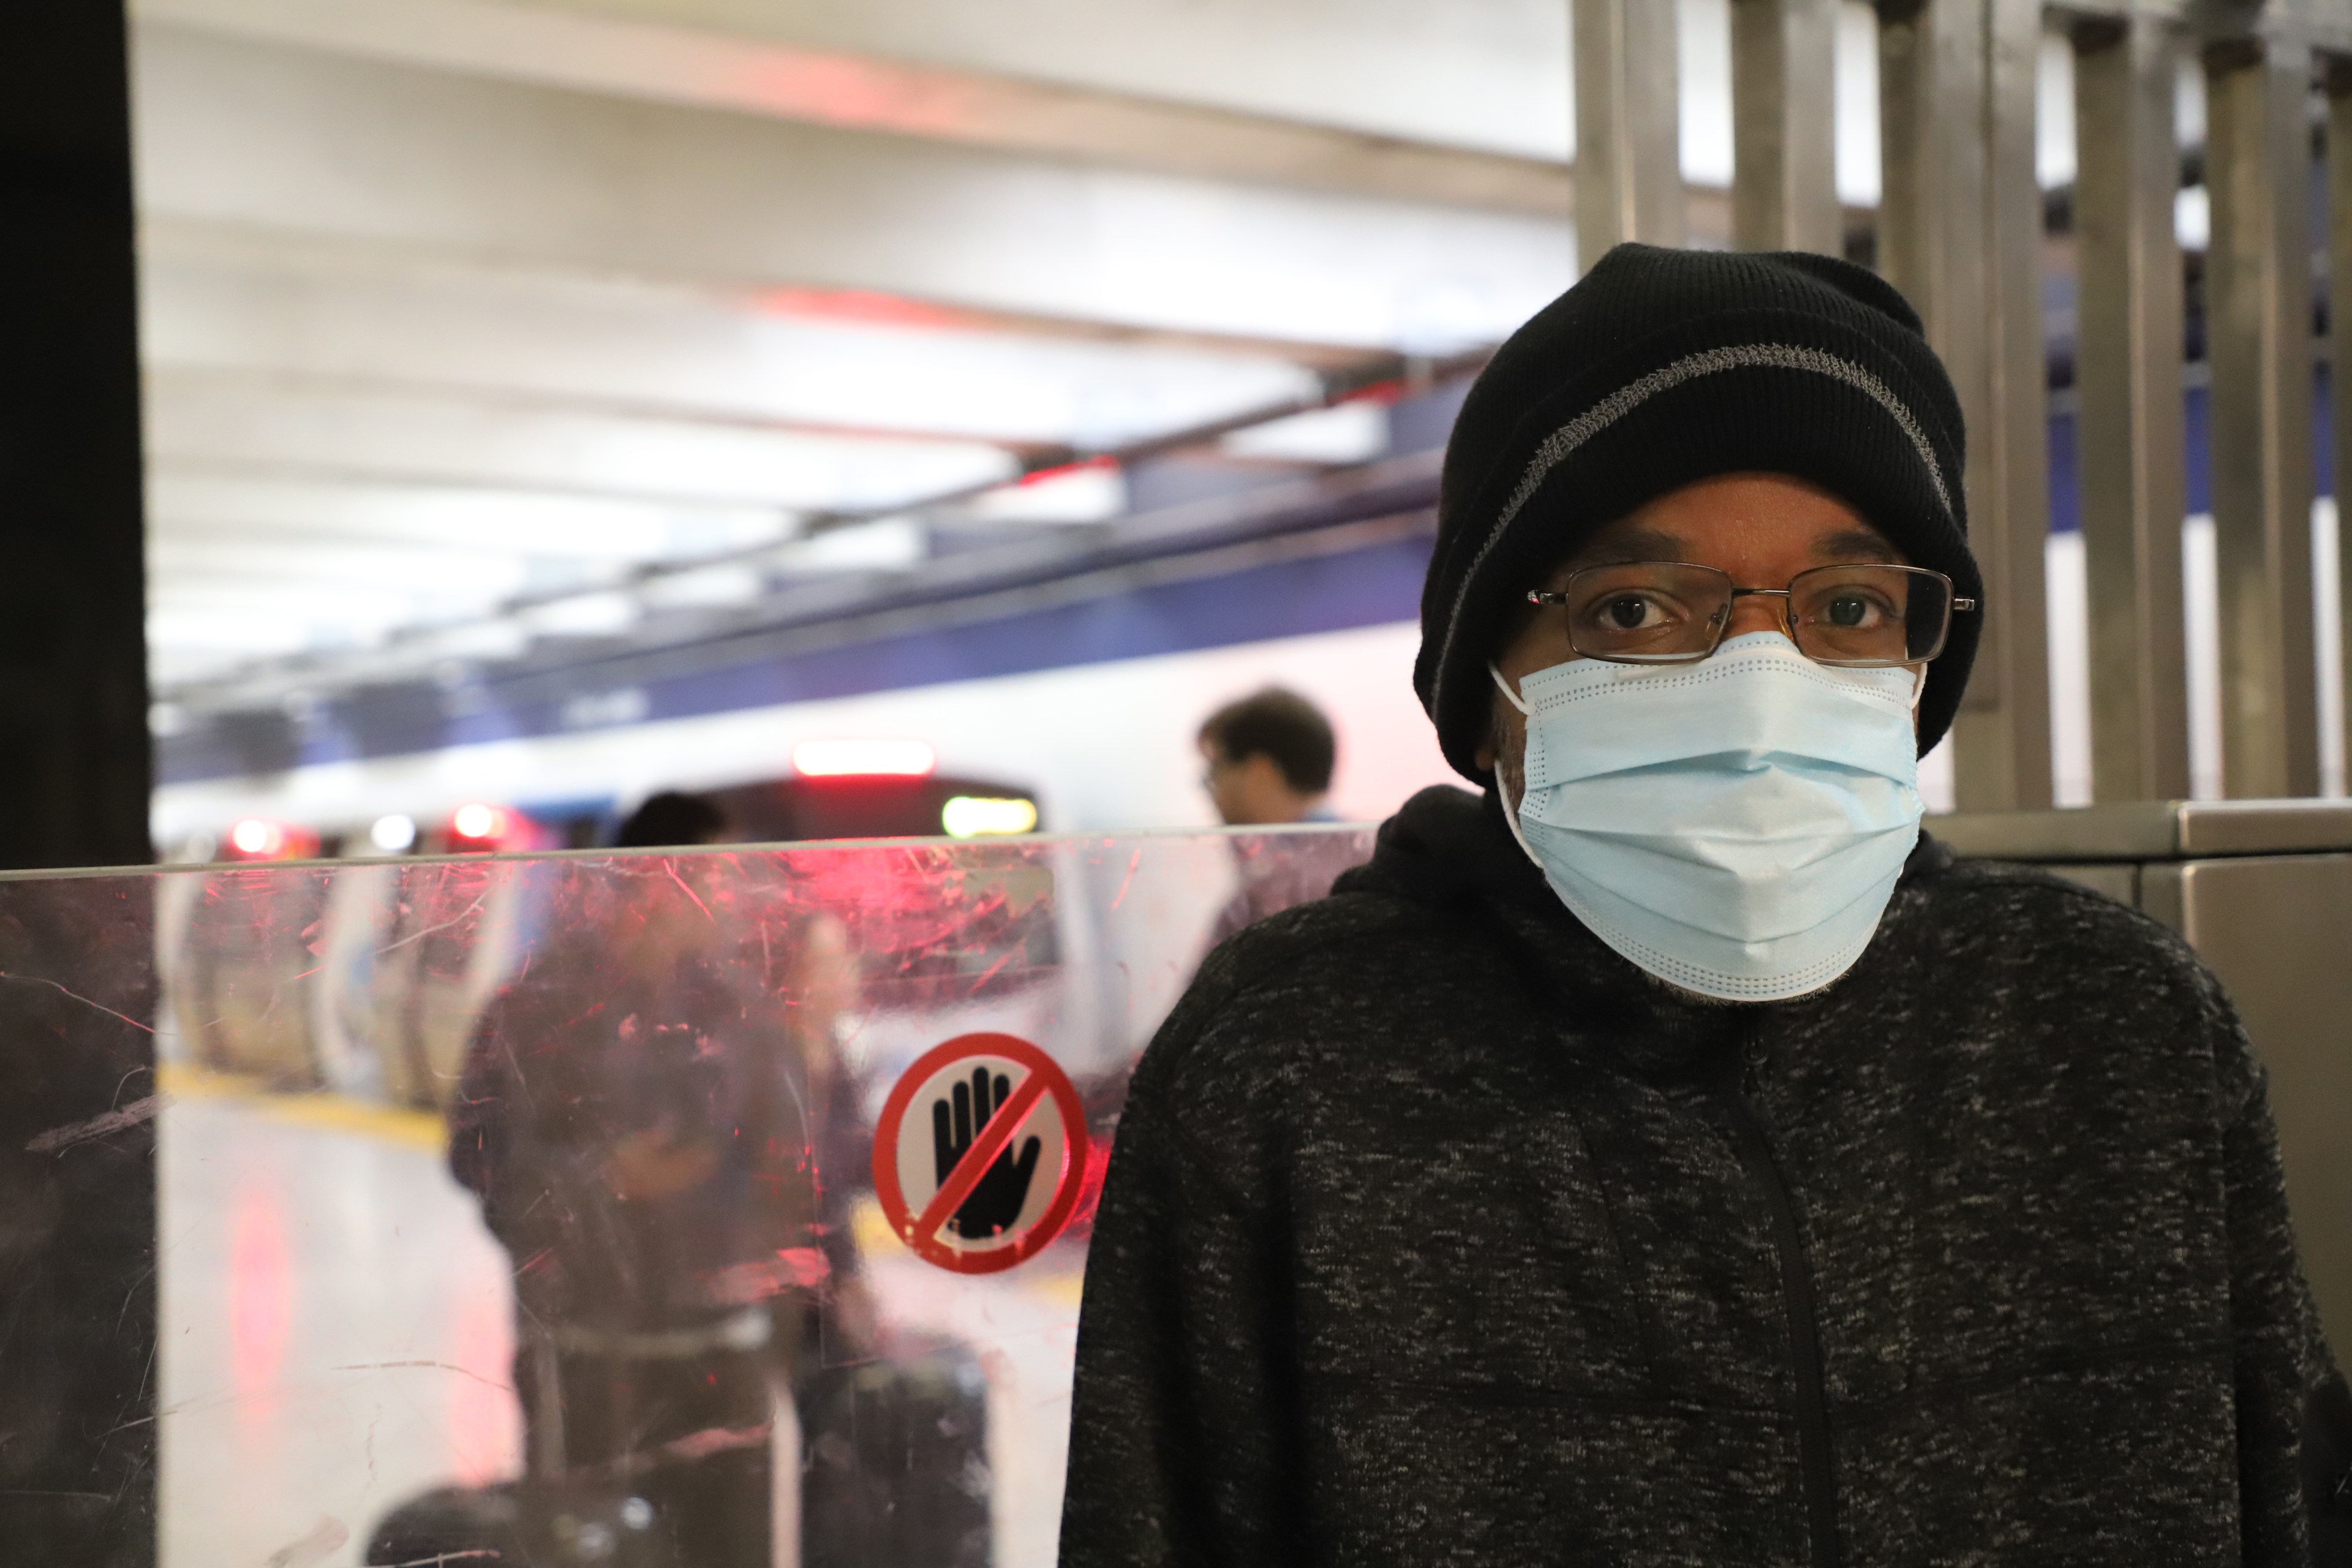 A person in a mask and beanie stands in a subway station with a blurry train in the background.